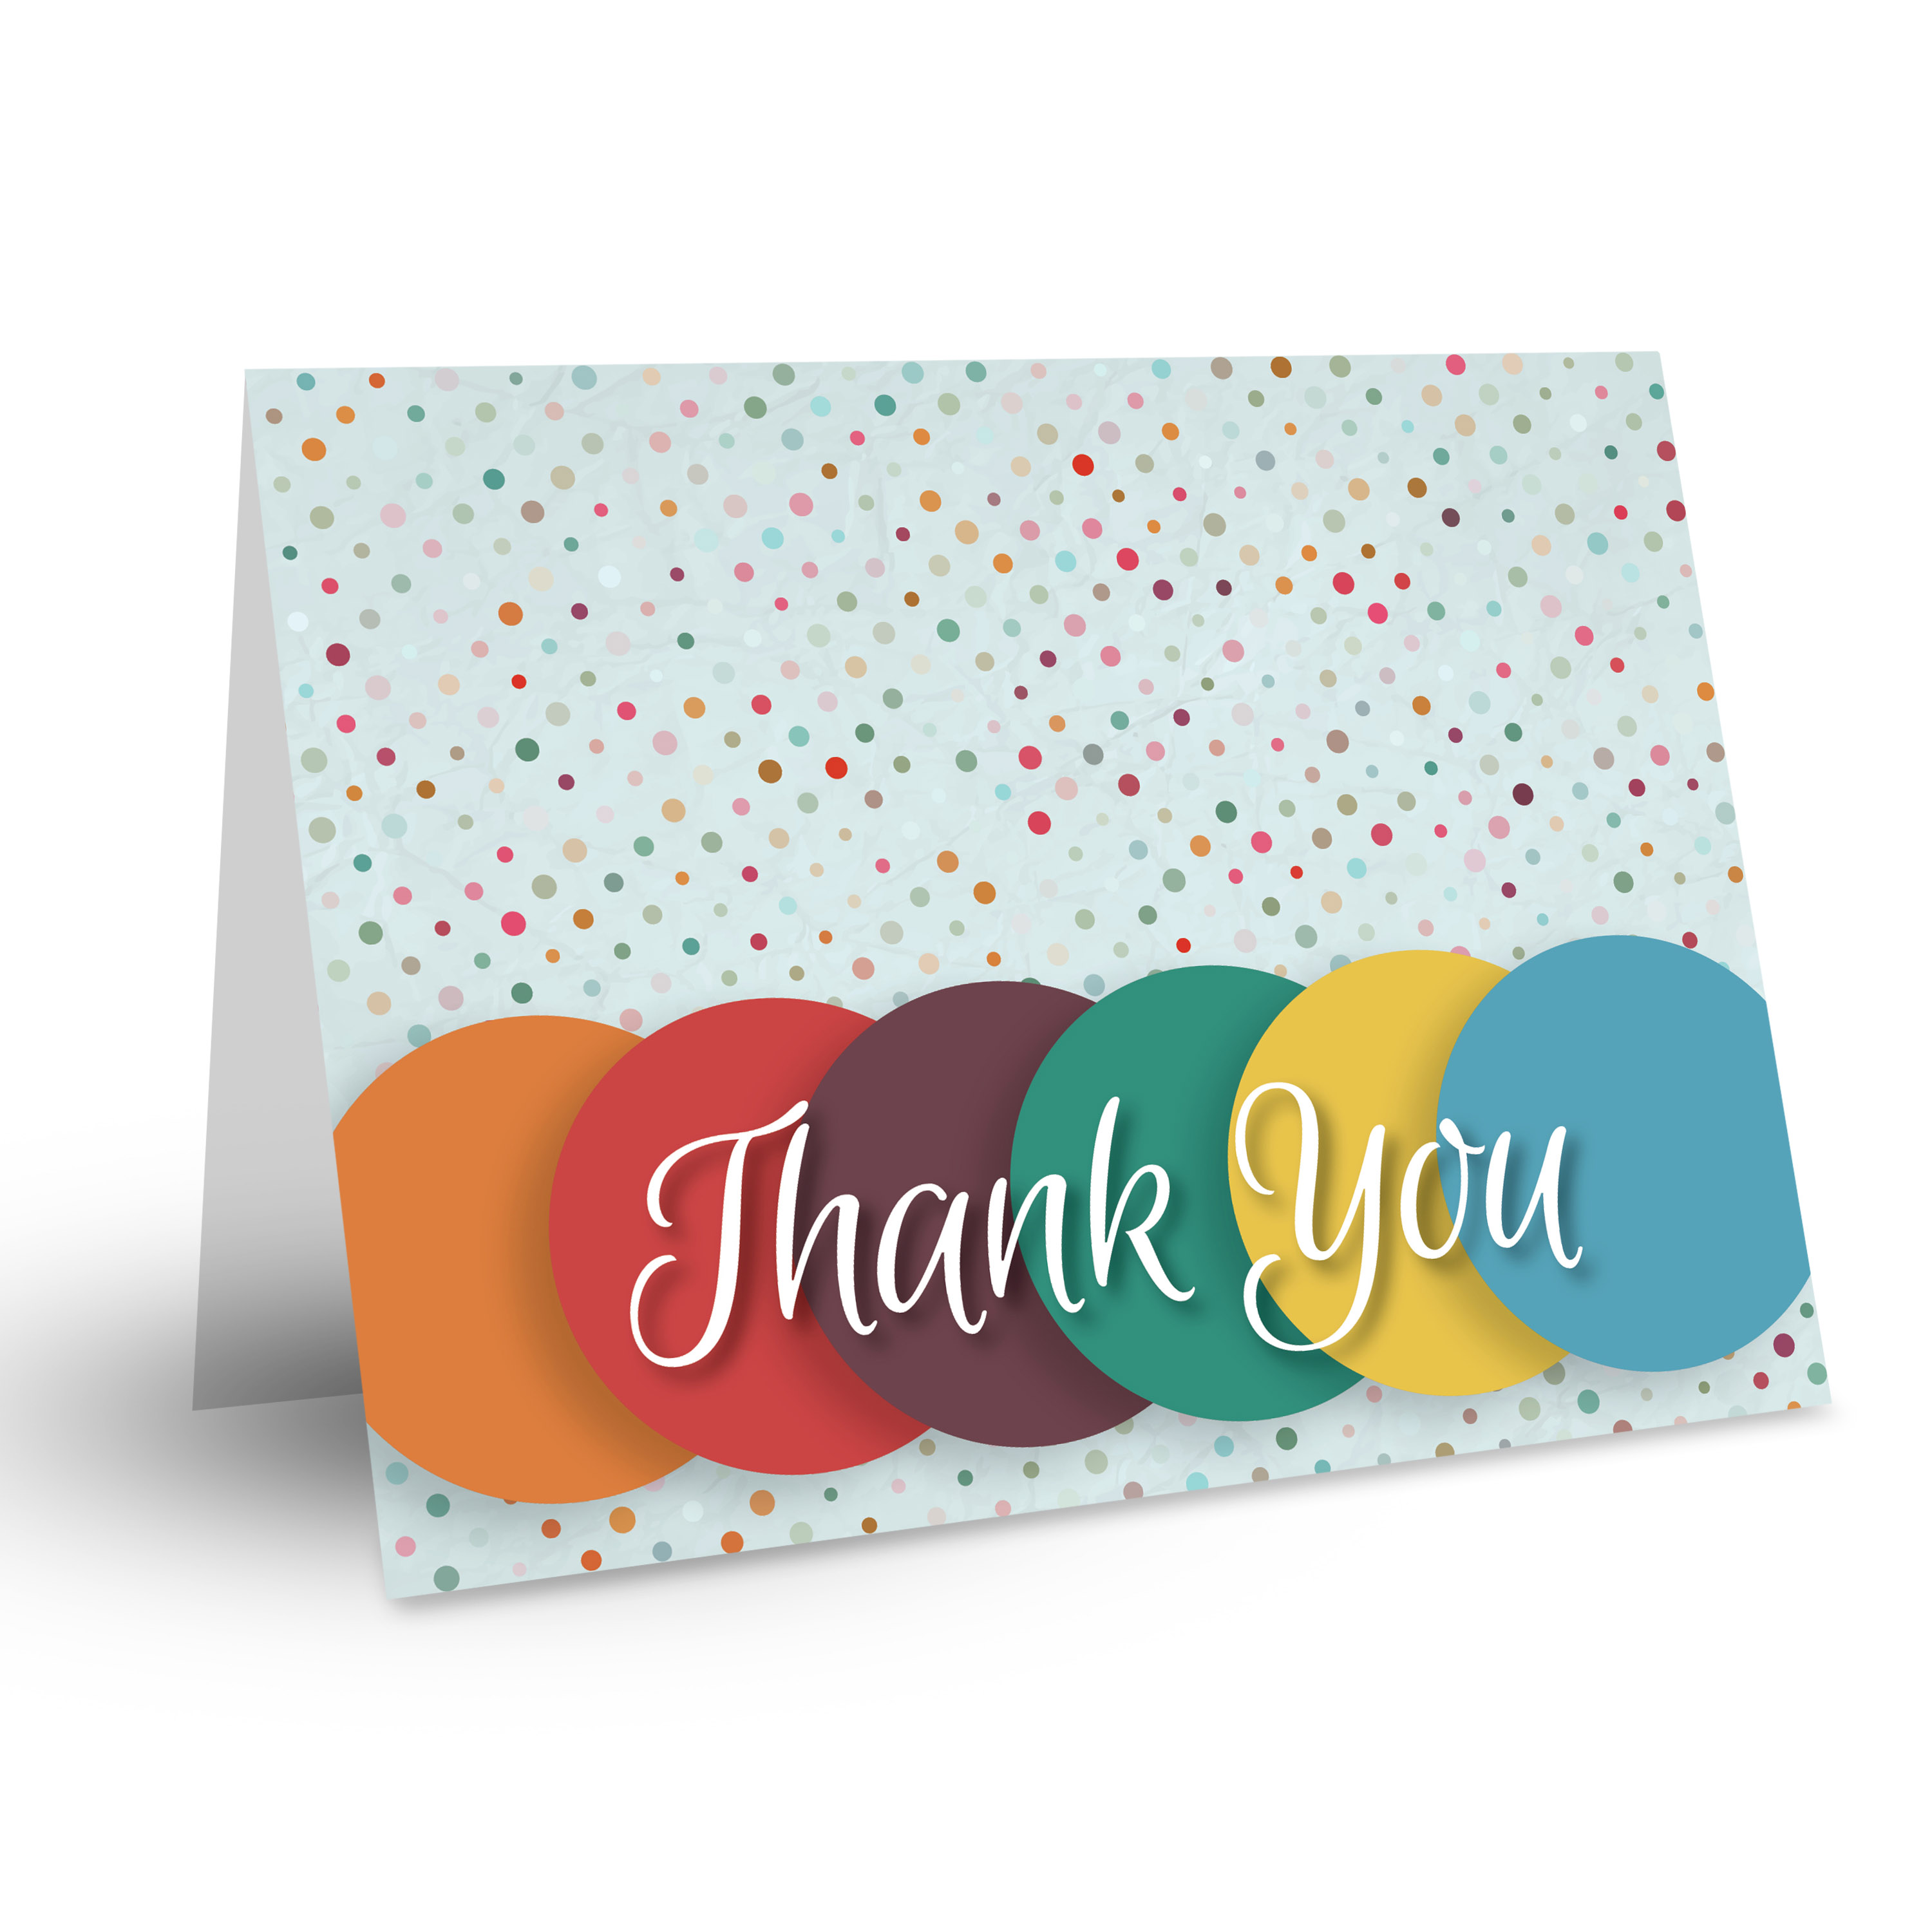 International Thanks Boxed Thank You Cards And Envelopes, 20-Count - Papyrus